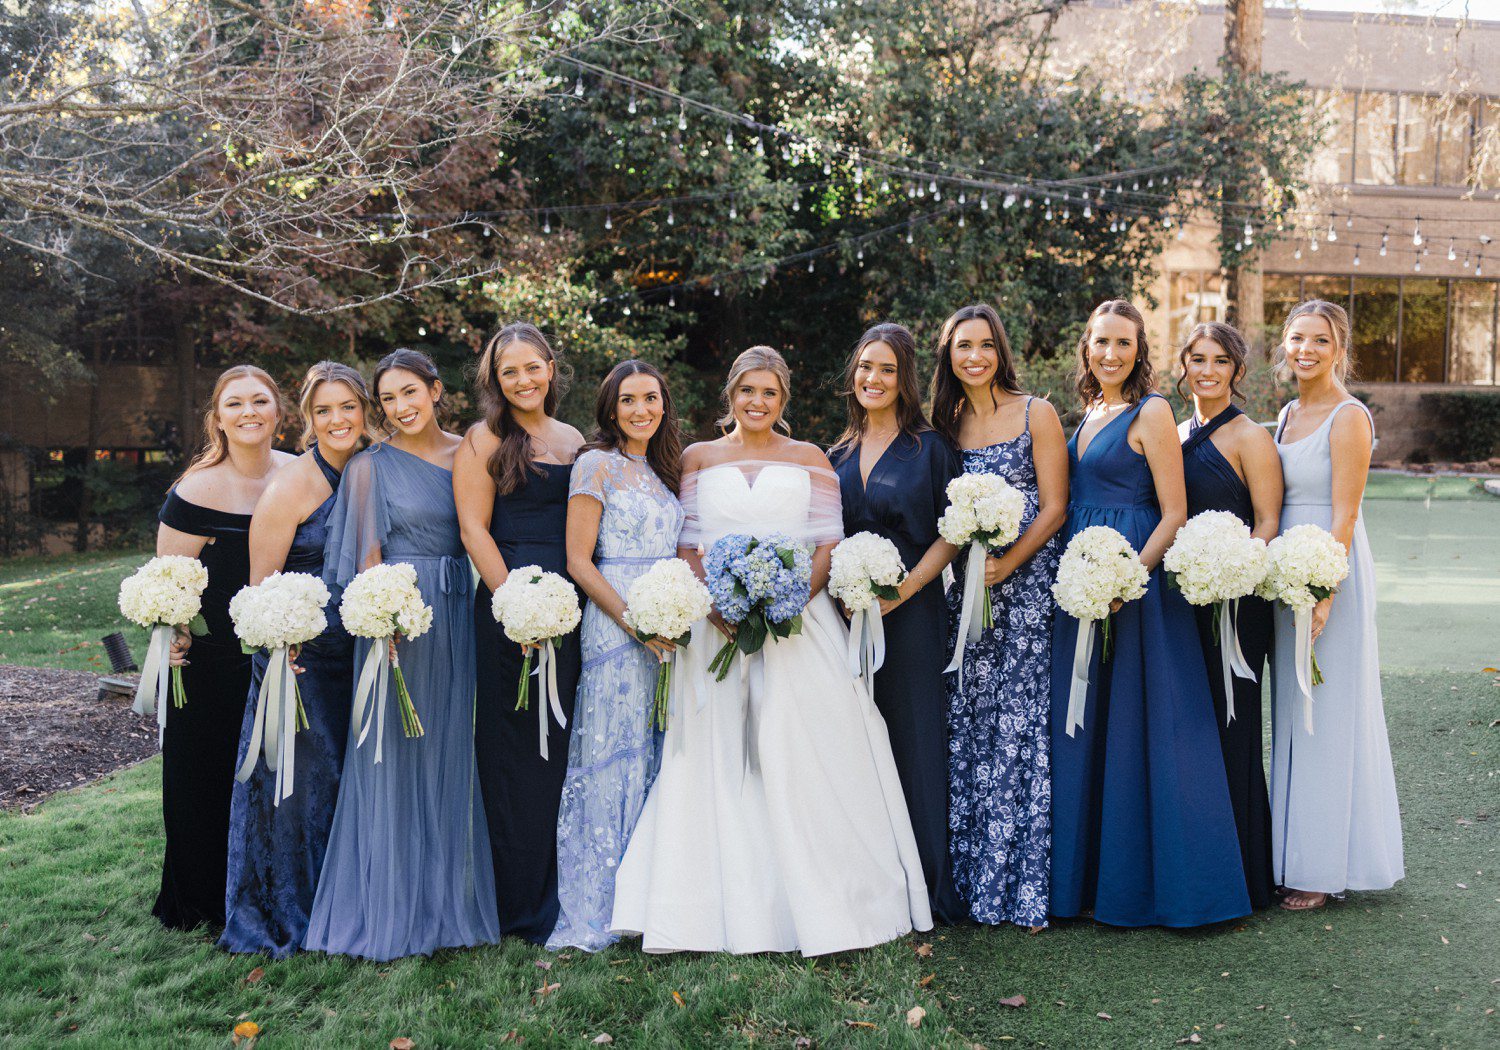 Bridesmaids photos at The Houstonian Hotel with bridesmaids in blue bridesmaid dresses with hydragea bouquets. 